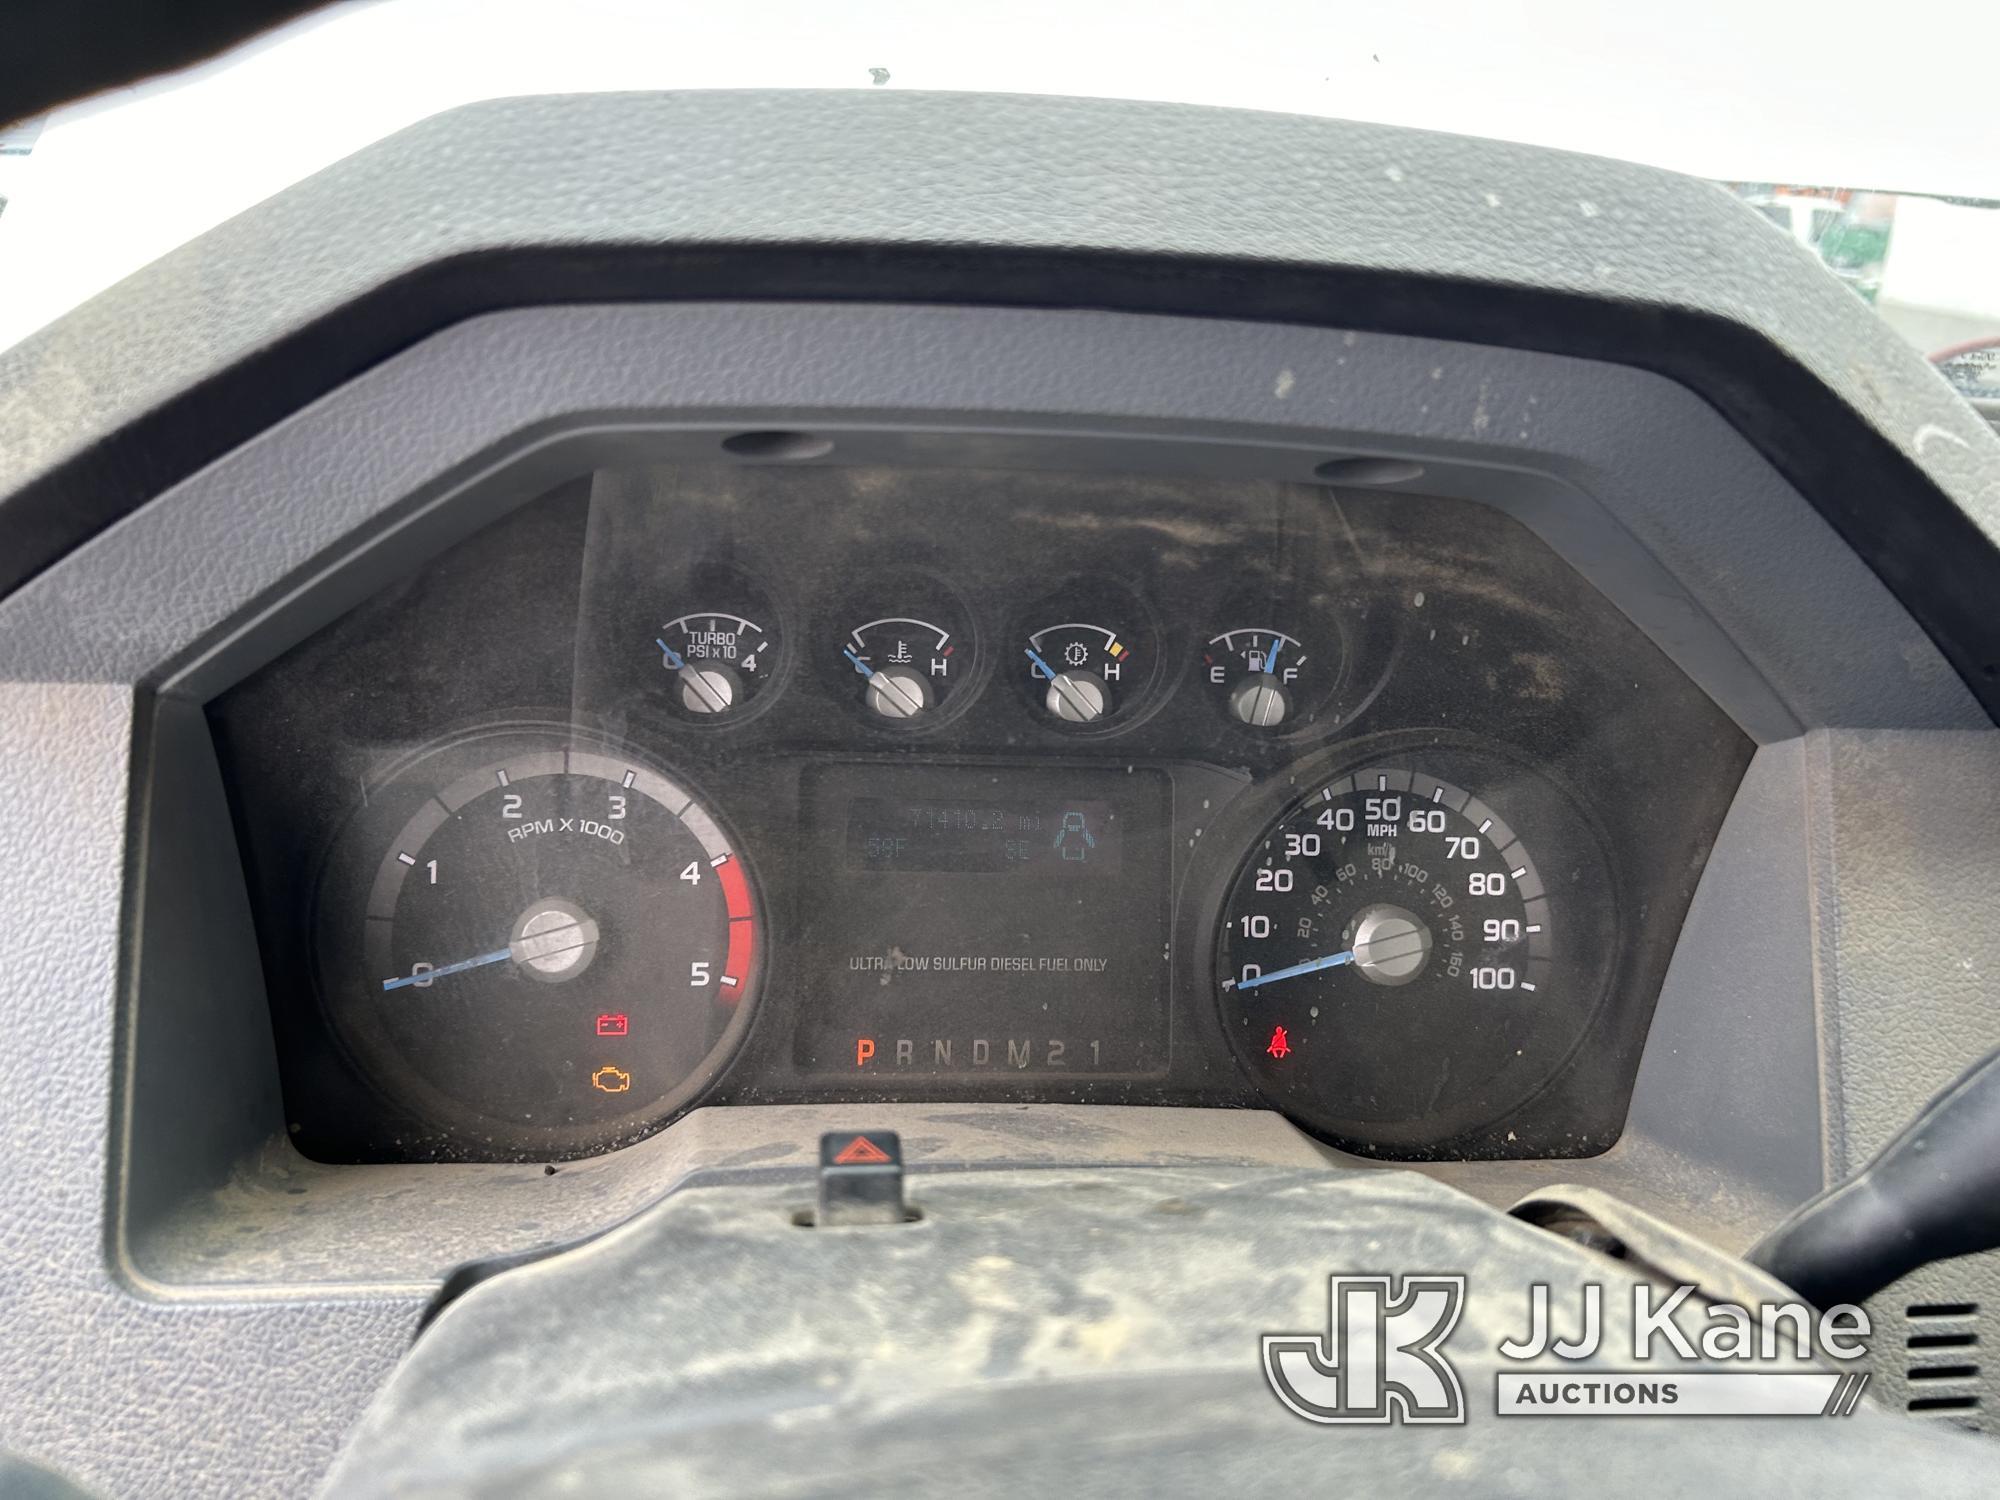 (Hagerstown, MD) 2015 Ford F550 Dump Truck Not Running, Engine Damage, Condition Unknown, Rust & Bod